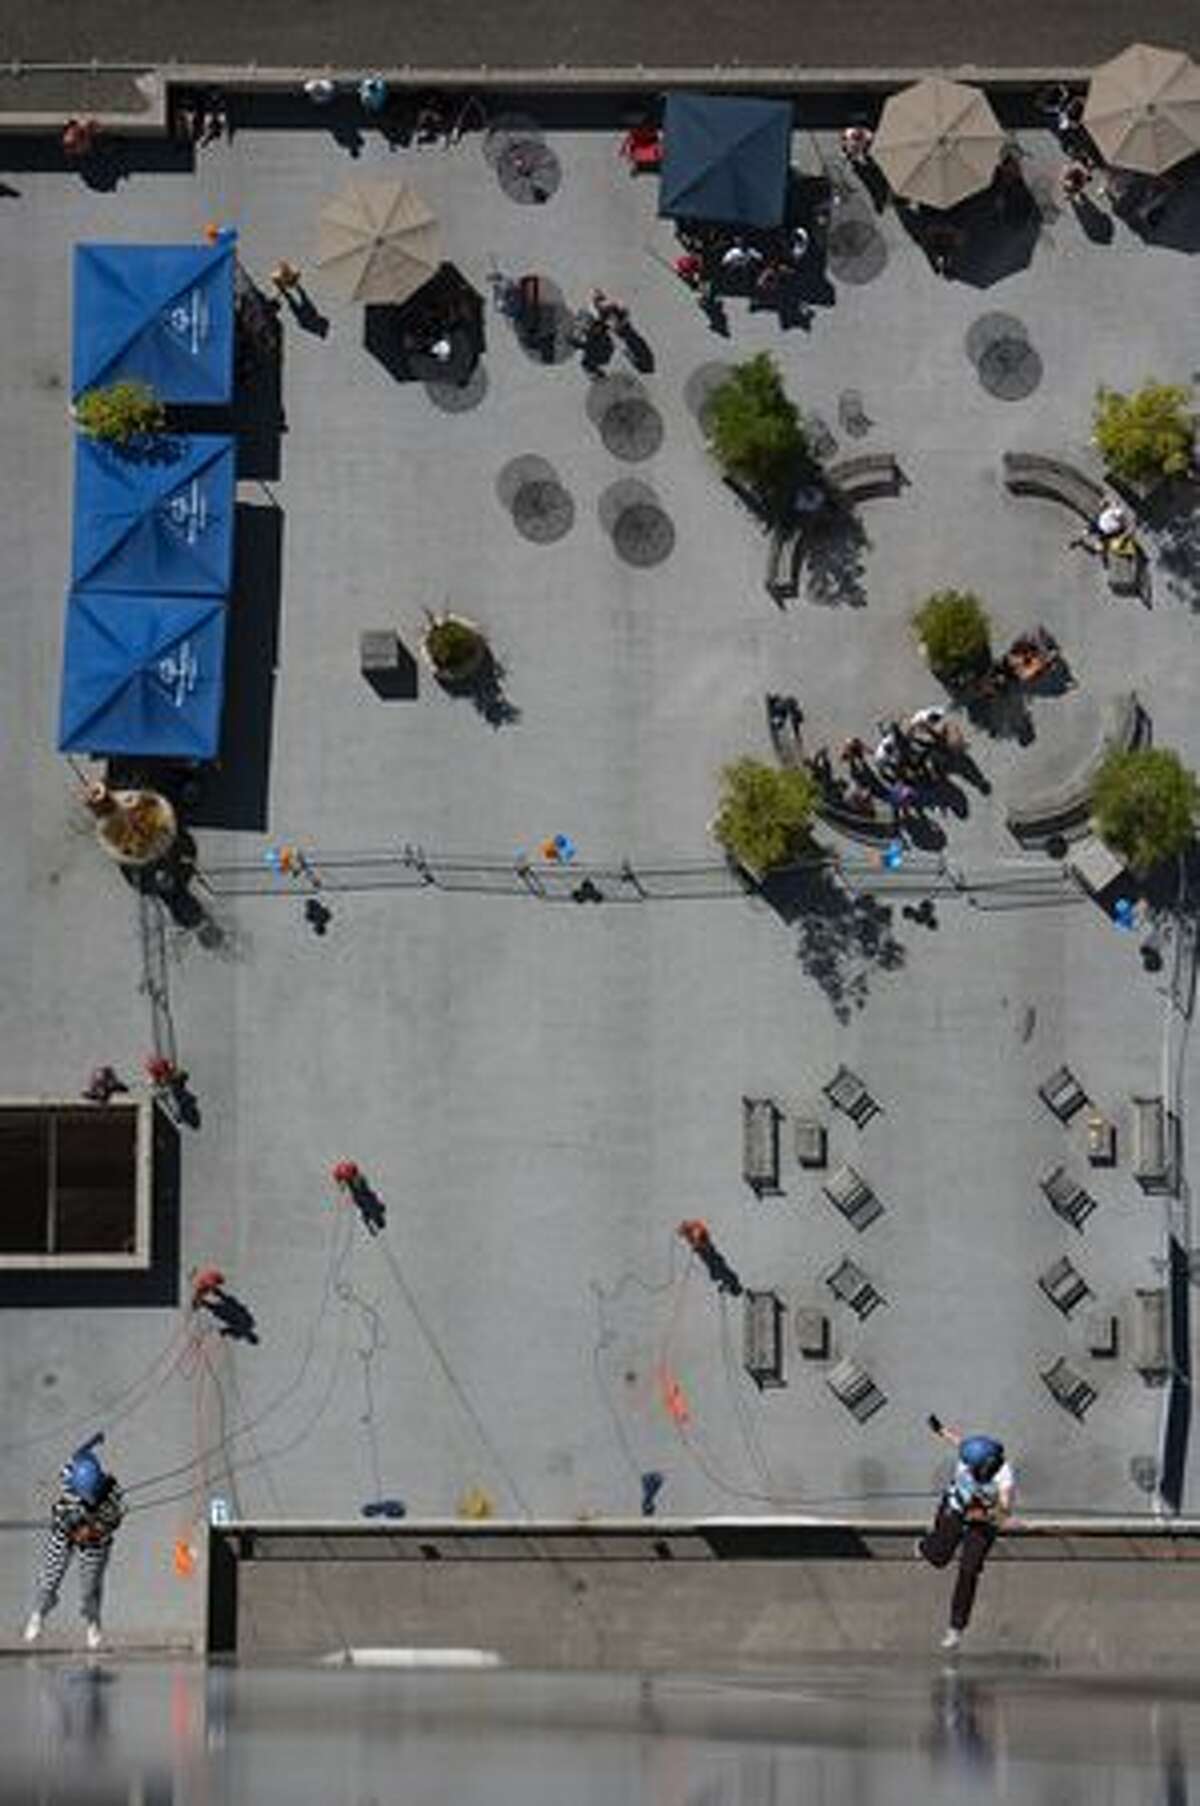 Rappellers descend during "Over the Edge," a fundraiser for Special Olympics Washington.